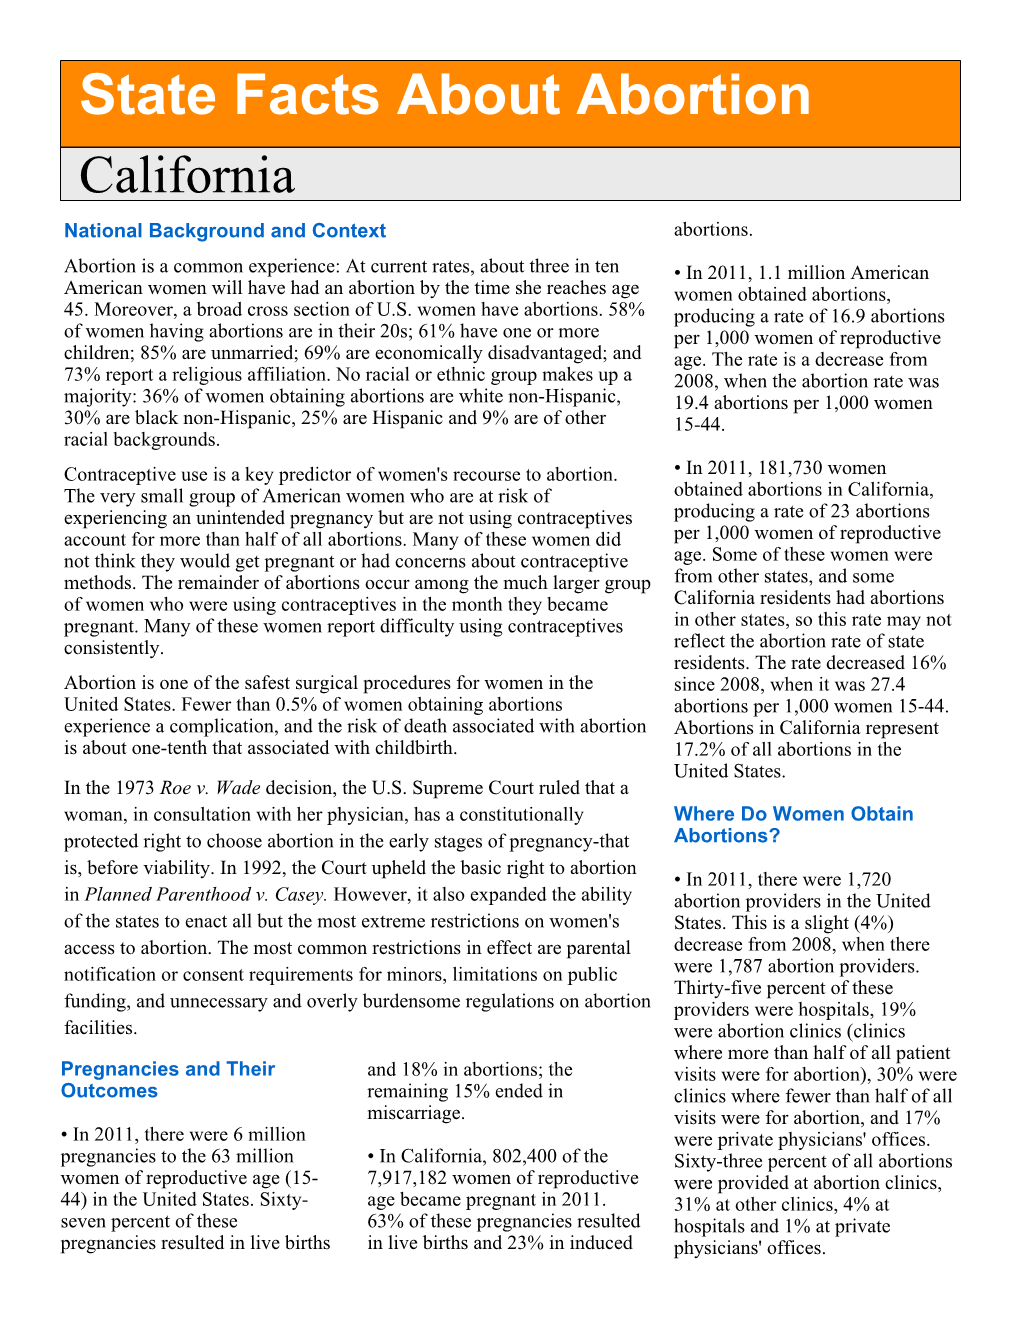 State Facts About Abortion California National Background and Context Abortions